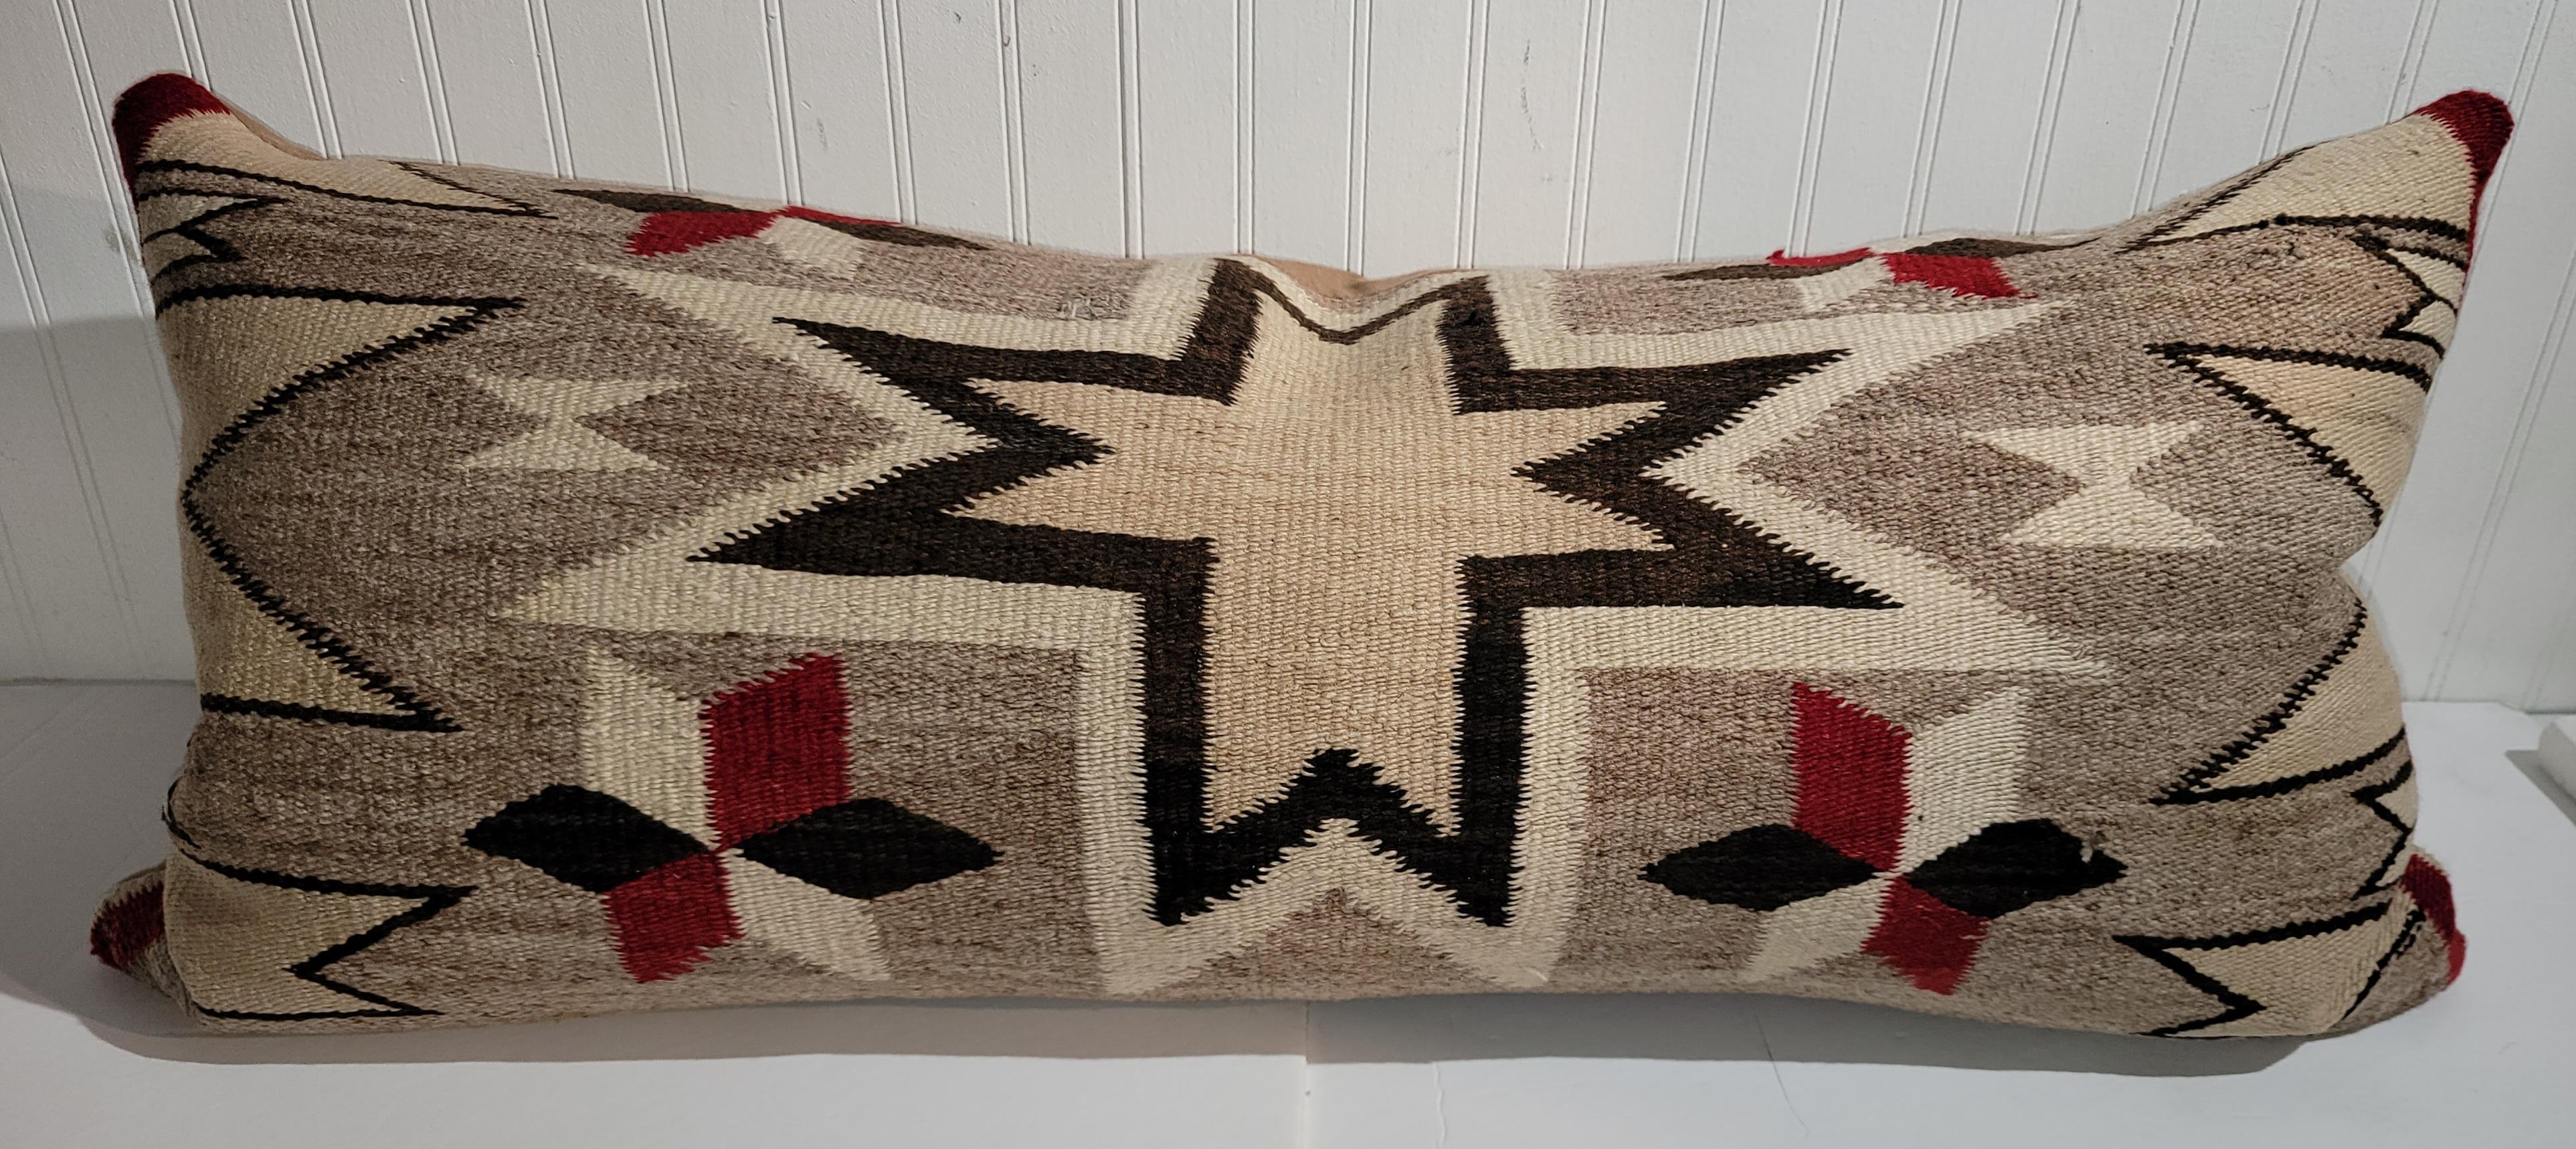 Adirondack Collection of Feather Star Navajo Indian Weaving Pillows -3 For Sale